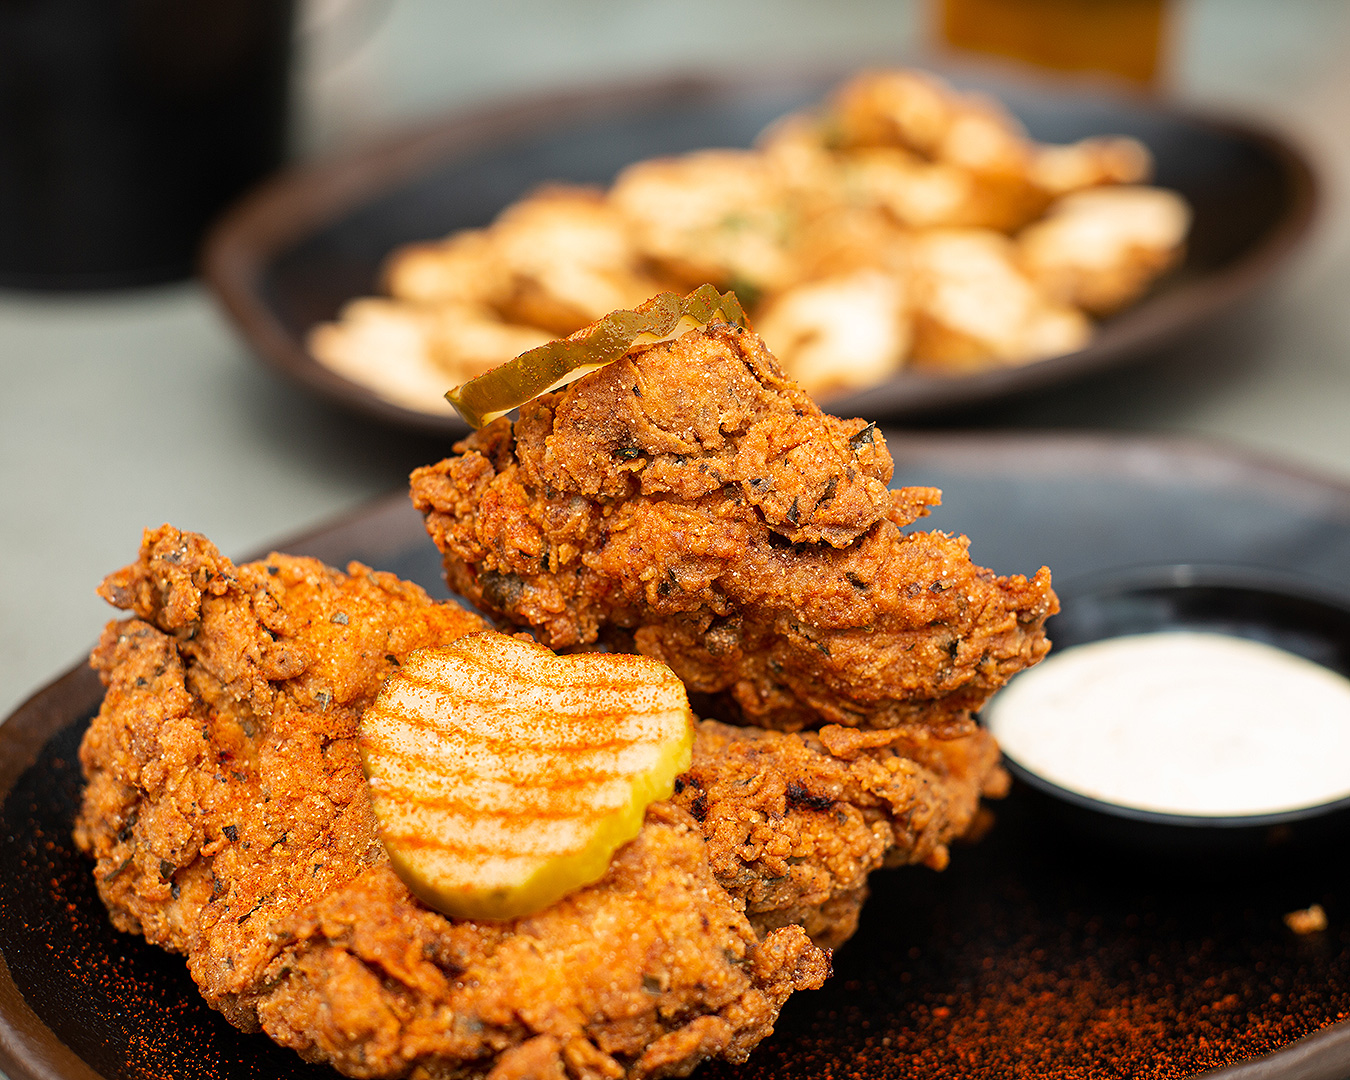 Crunchy, juicy fried chicken topped with pickles from Brew'd Hawt, one of the best spots for fried chicken in auckland.